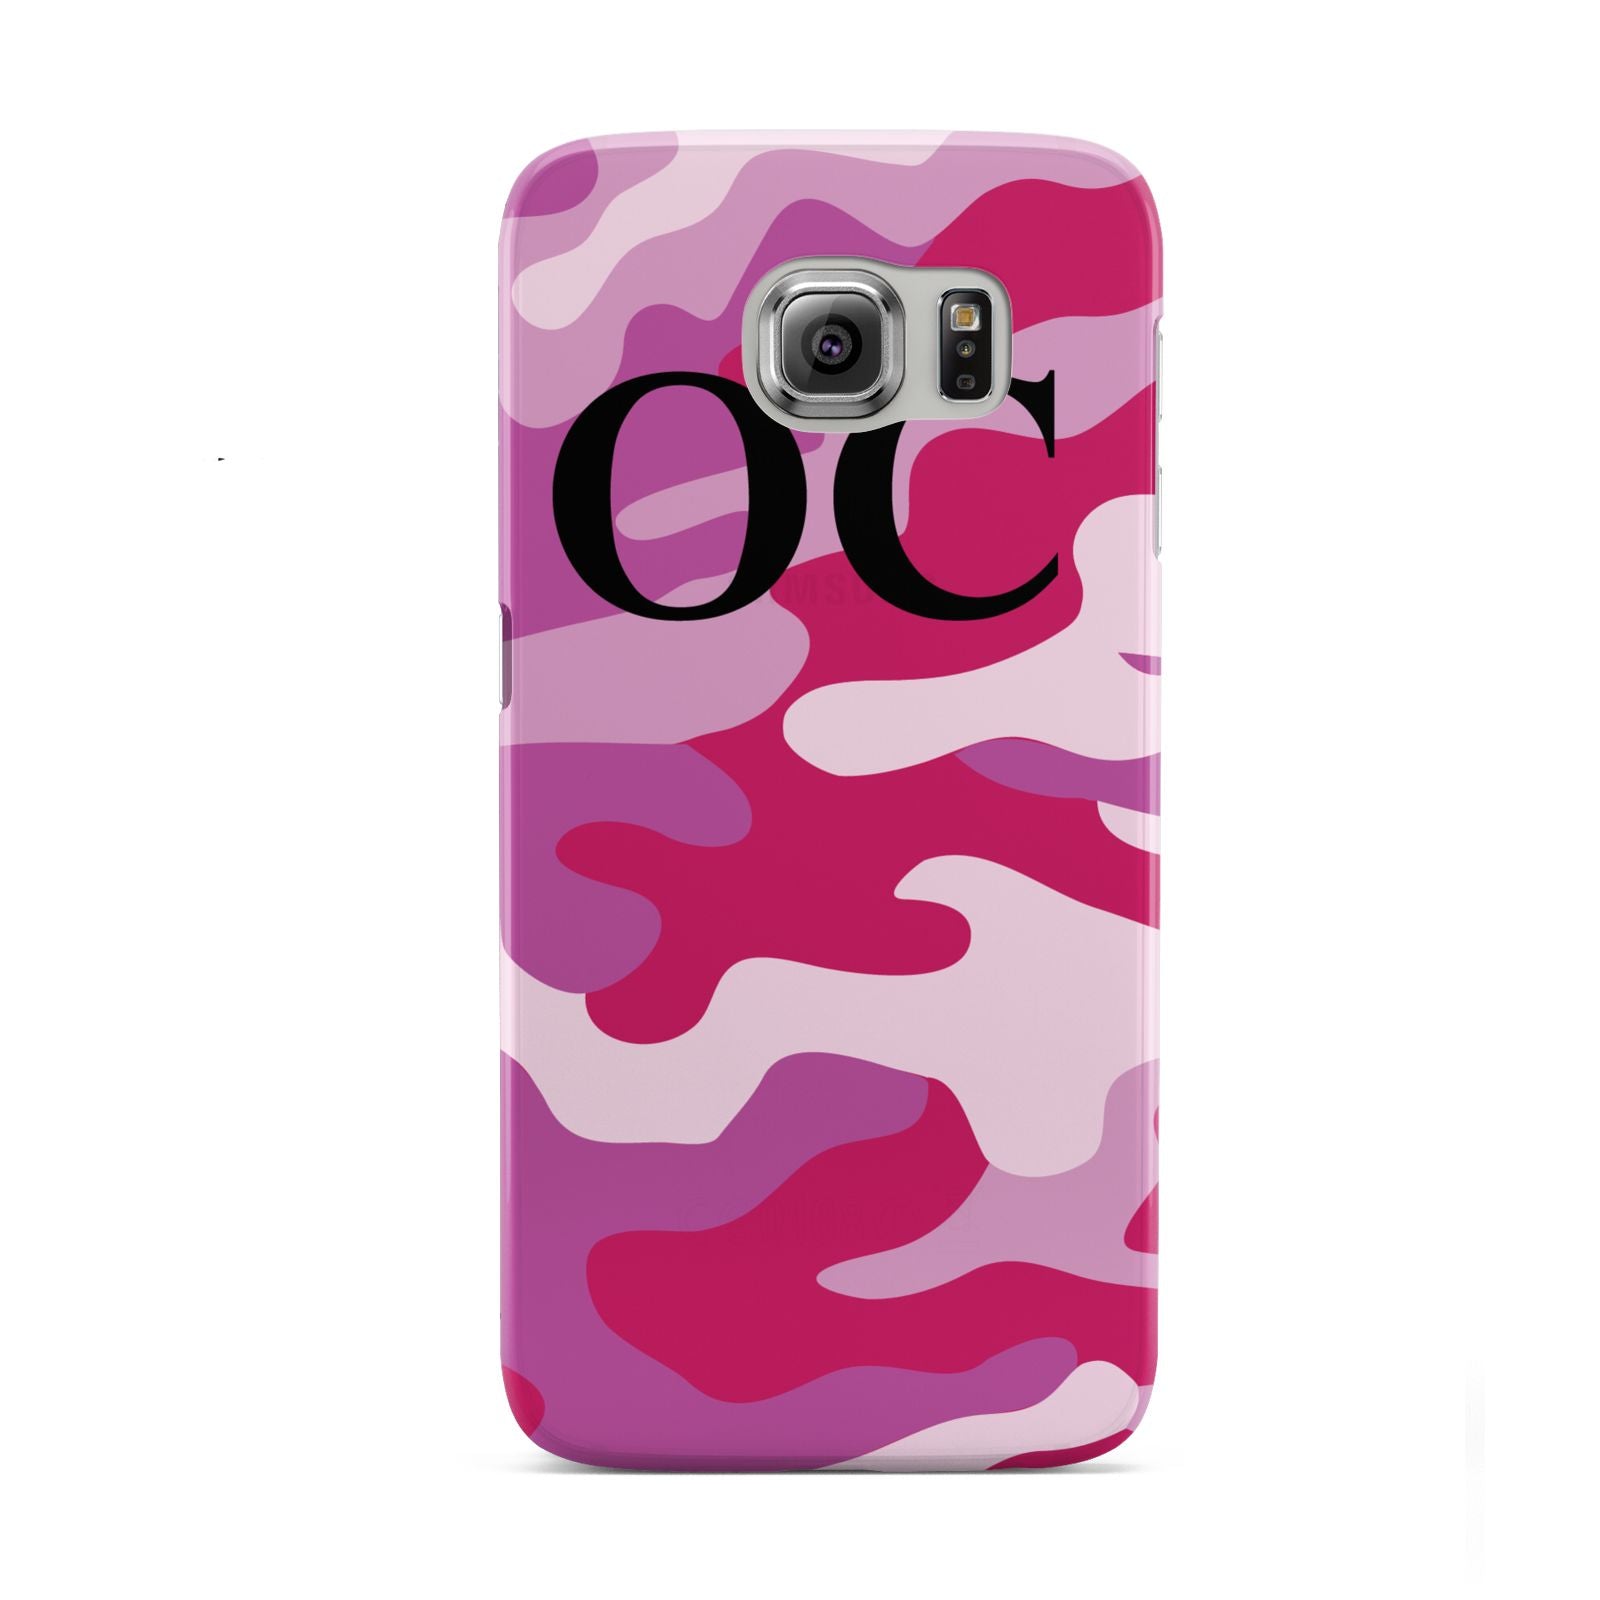 Camouflage Personalised Samsung Galaxy S6 Case